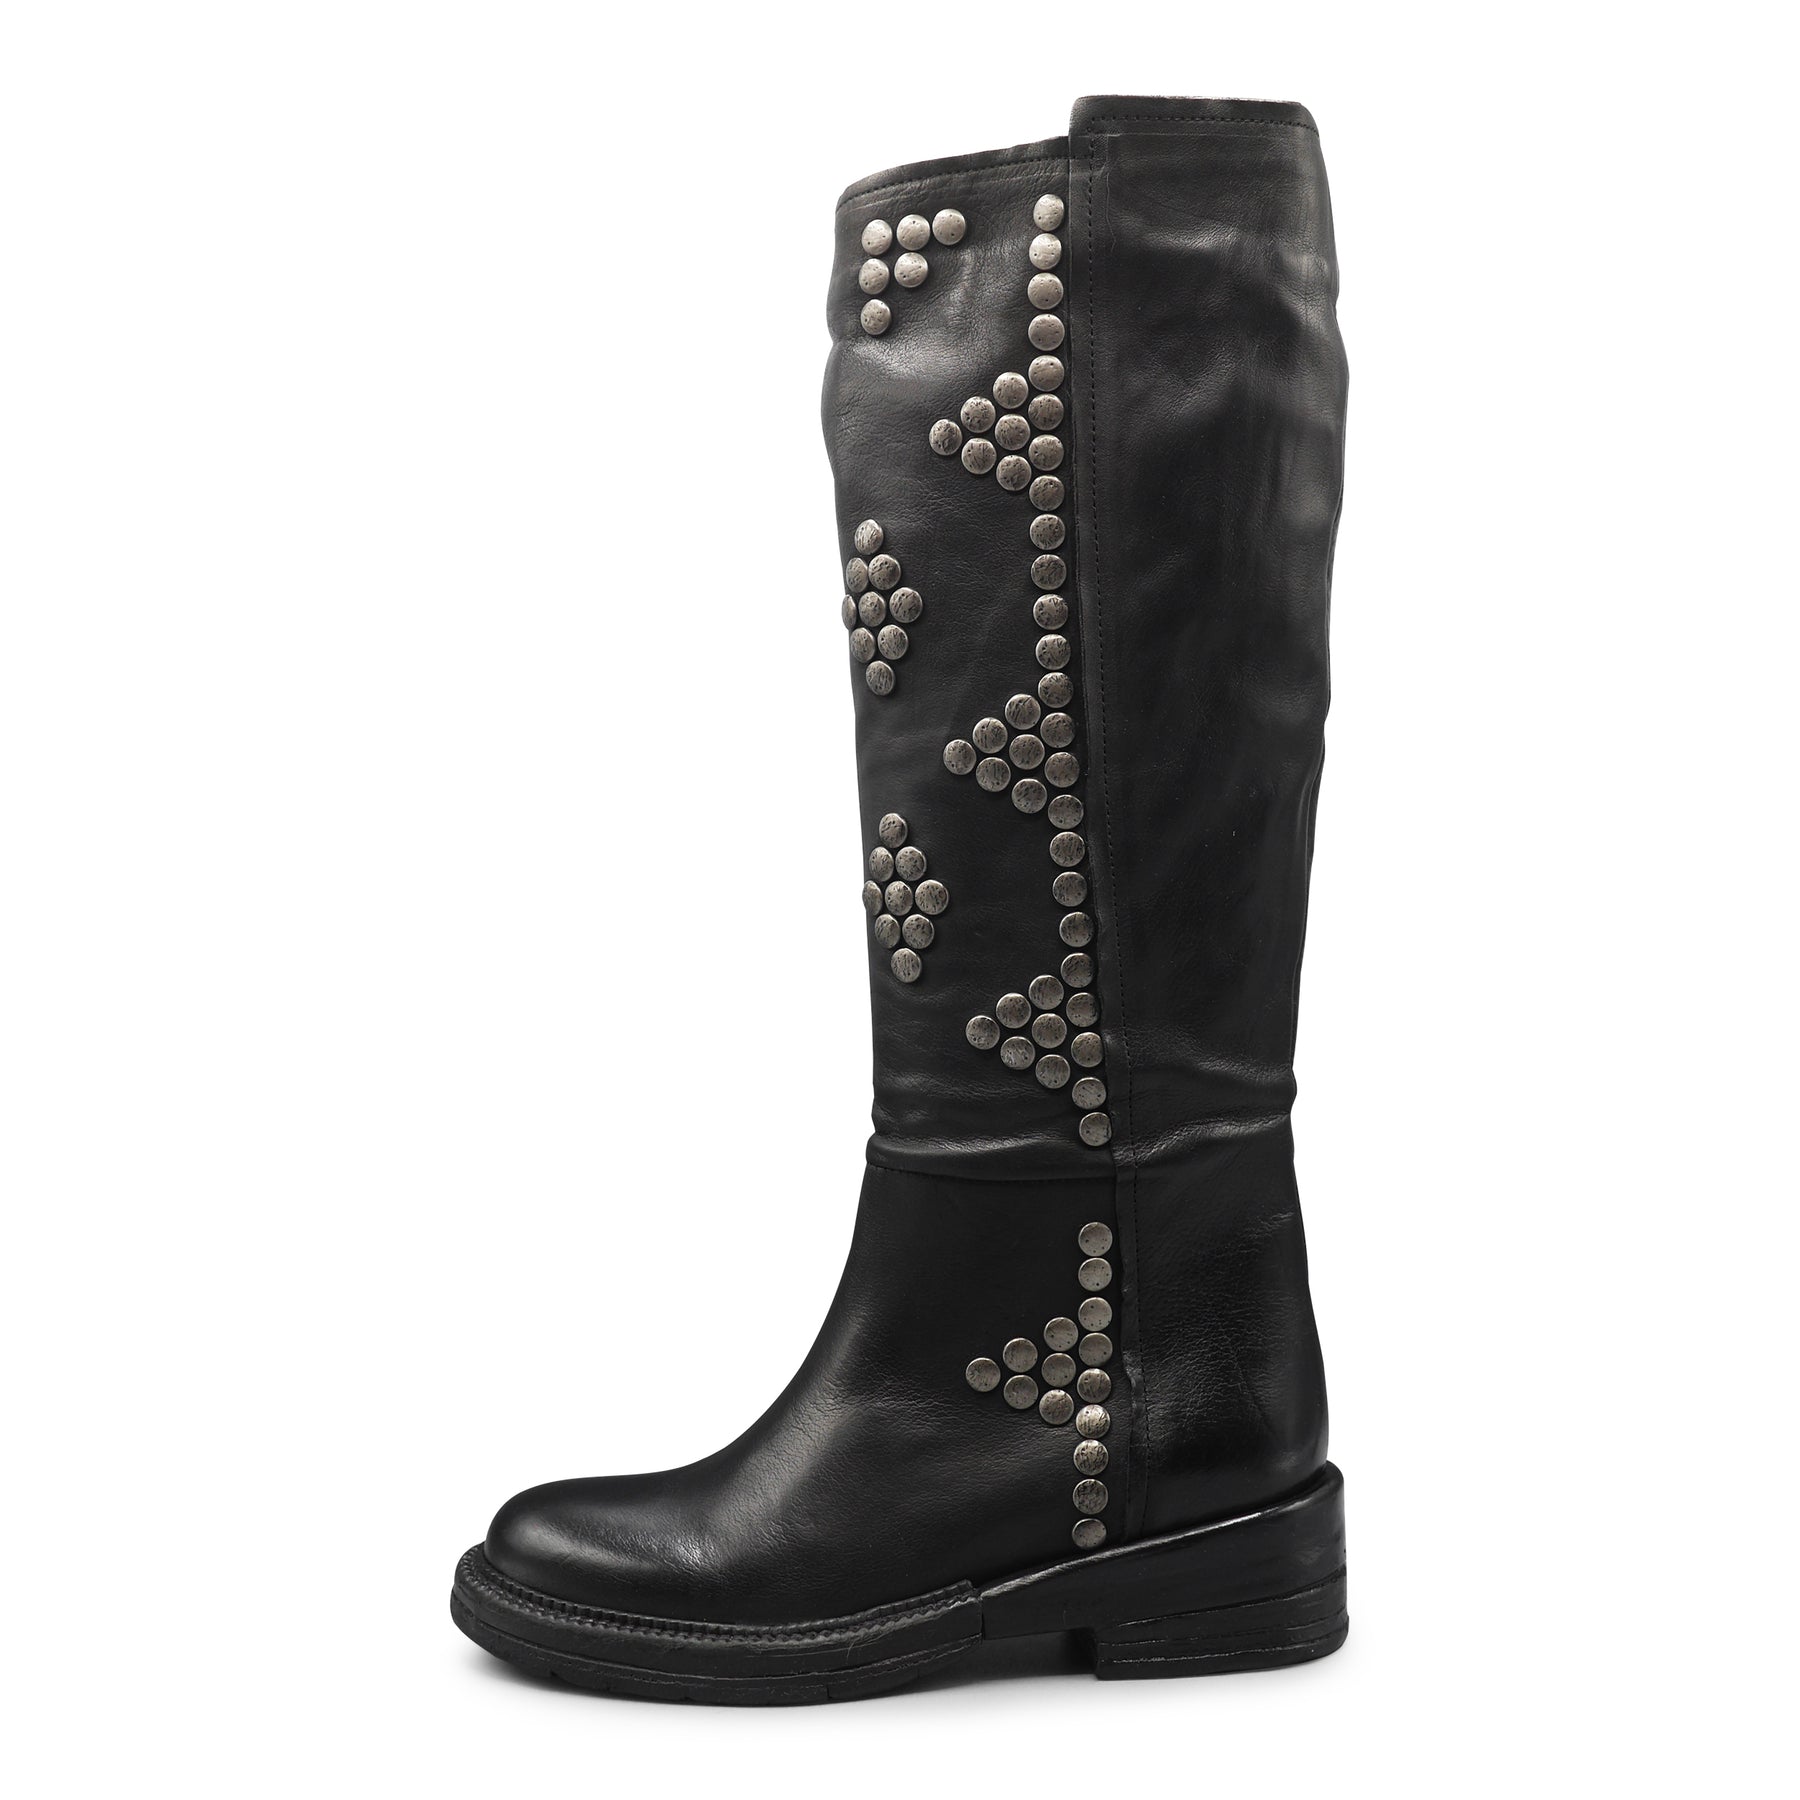 F659K2 - Black Knee High Boot With Studs